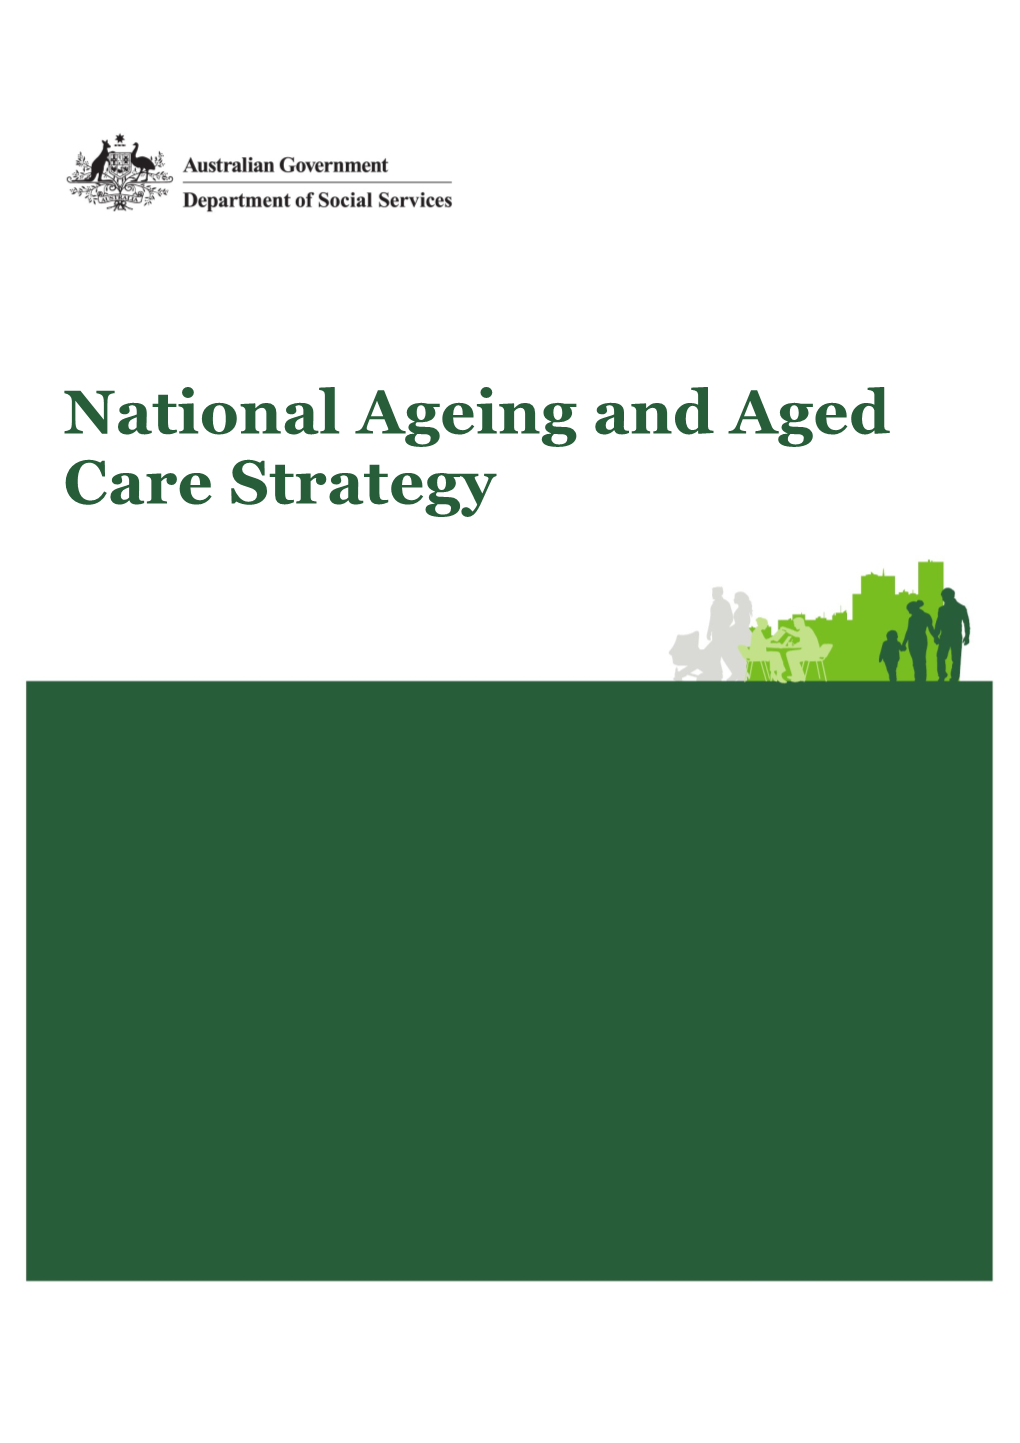 National Ageing and Aged Care Strategy